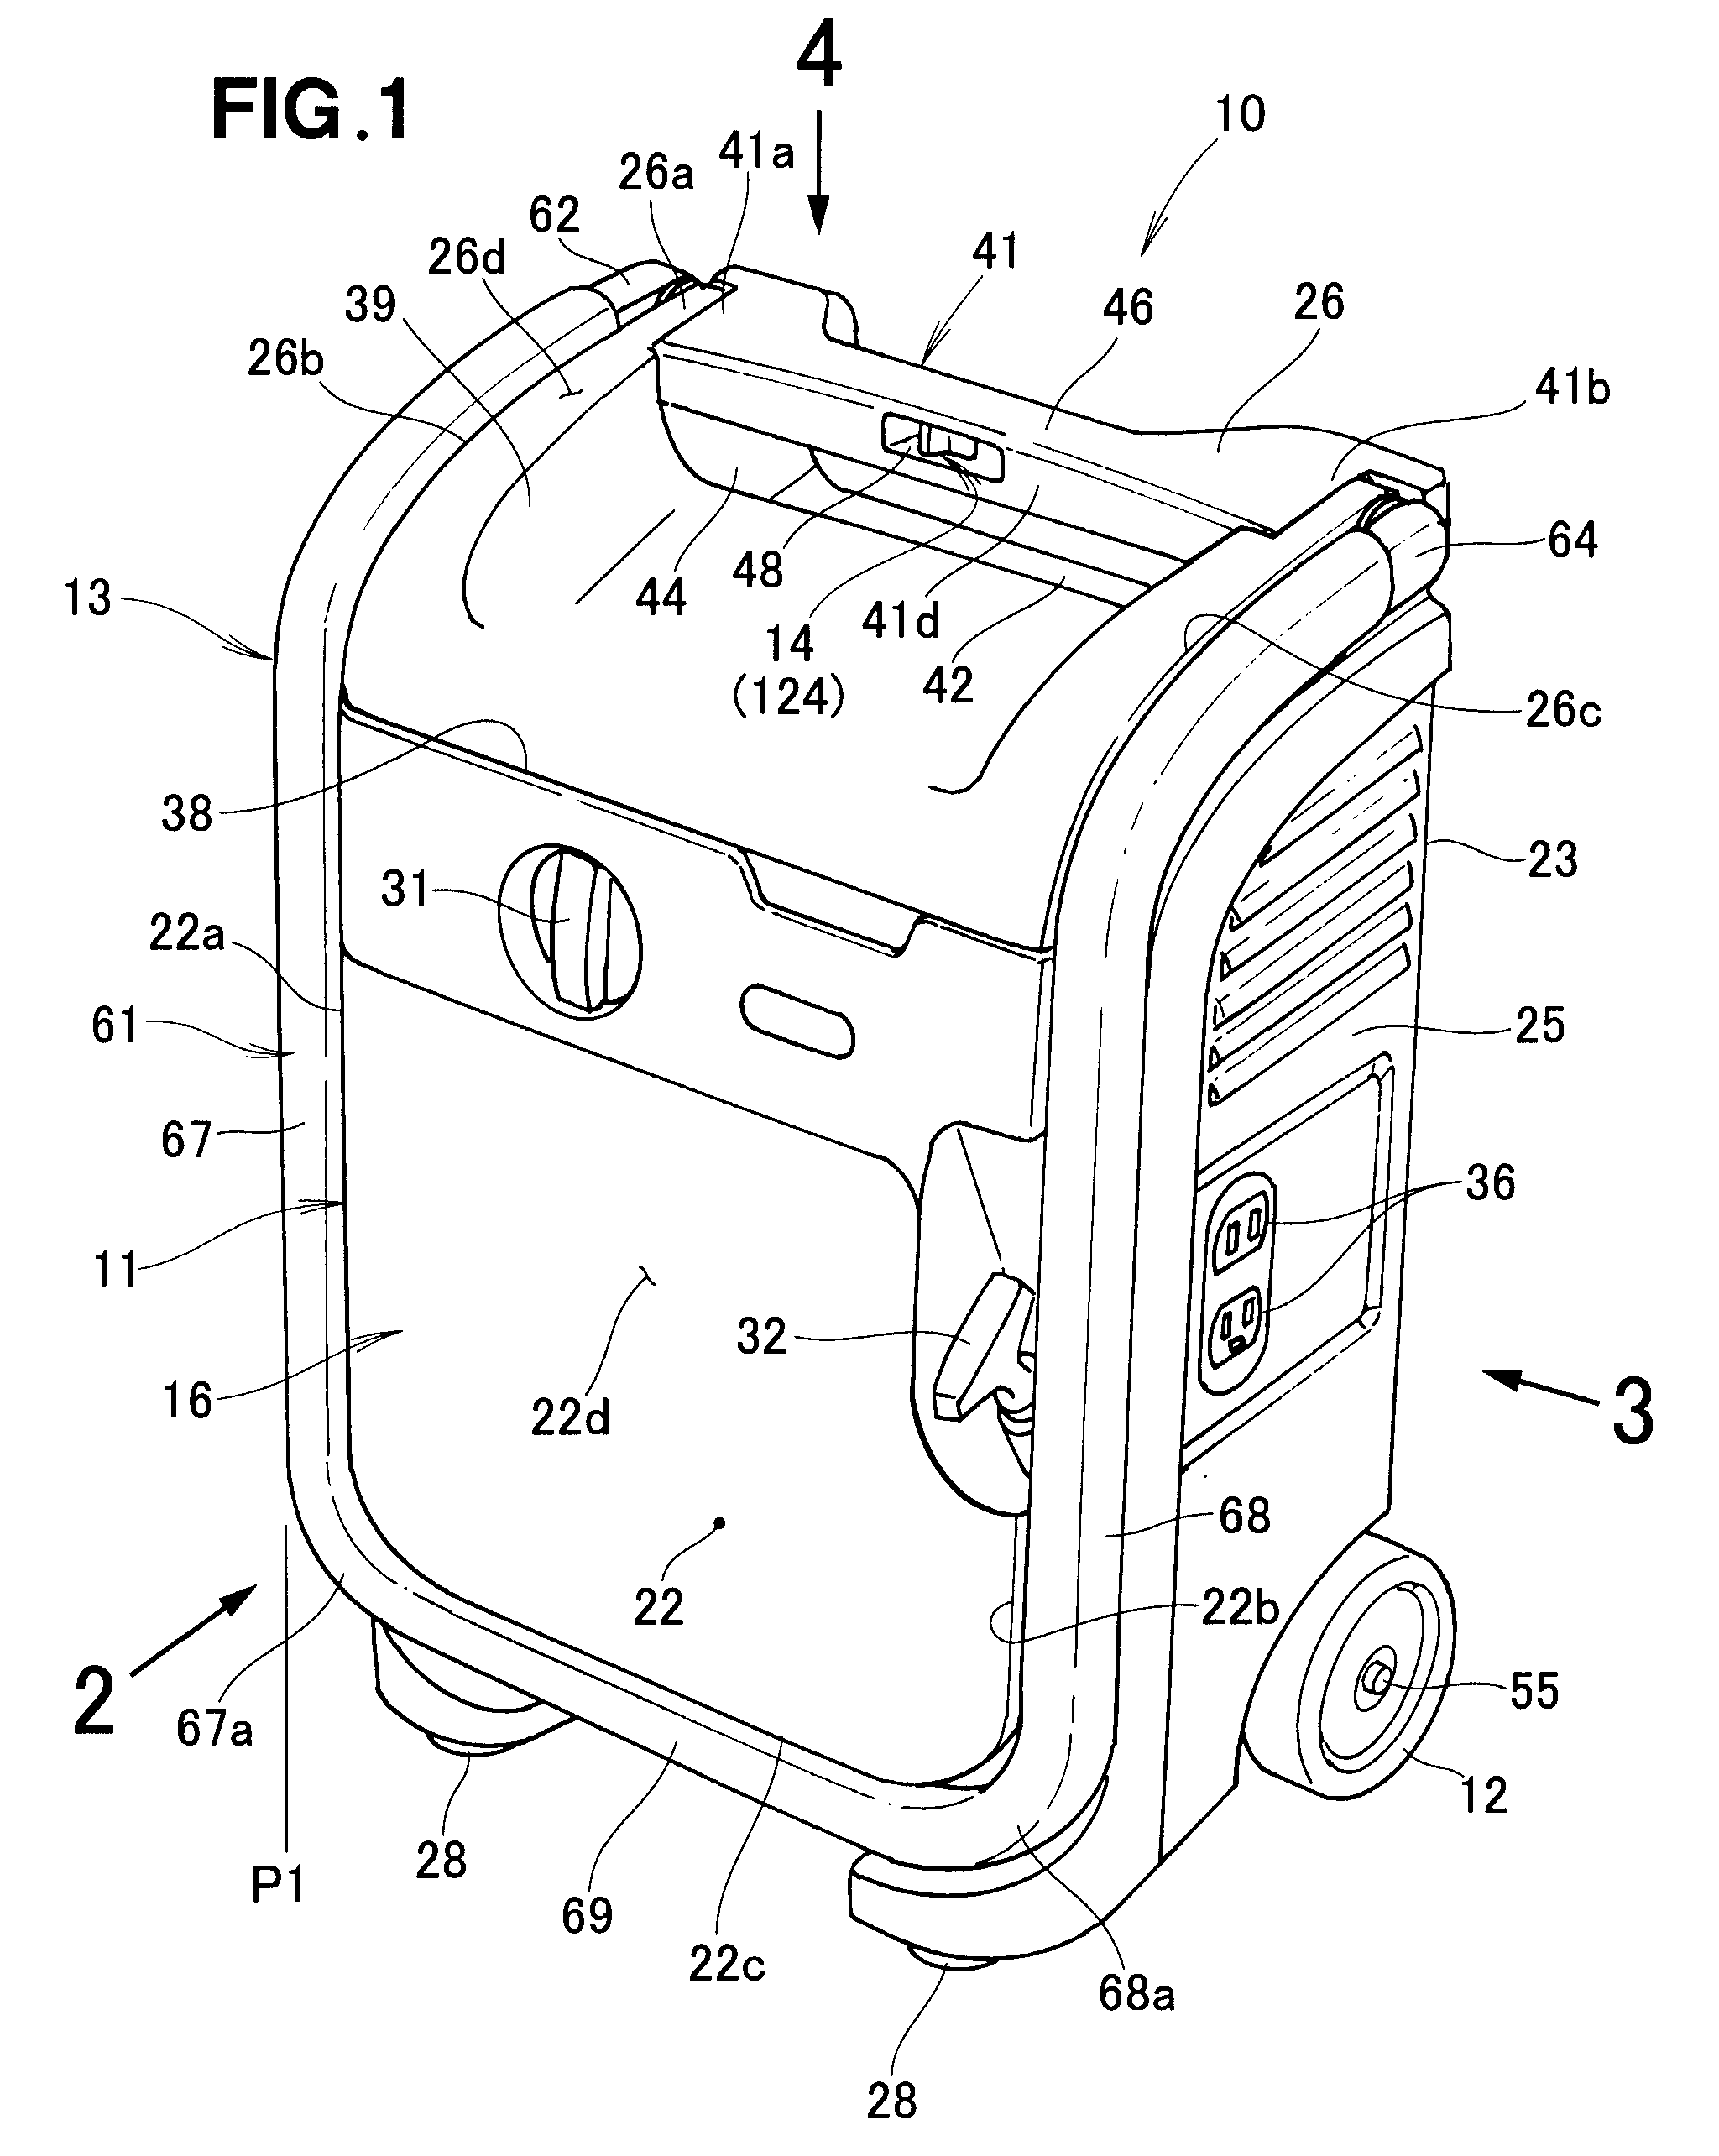 Handle lock structure for working machine